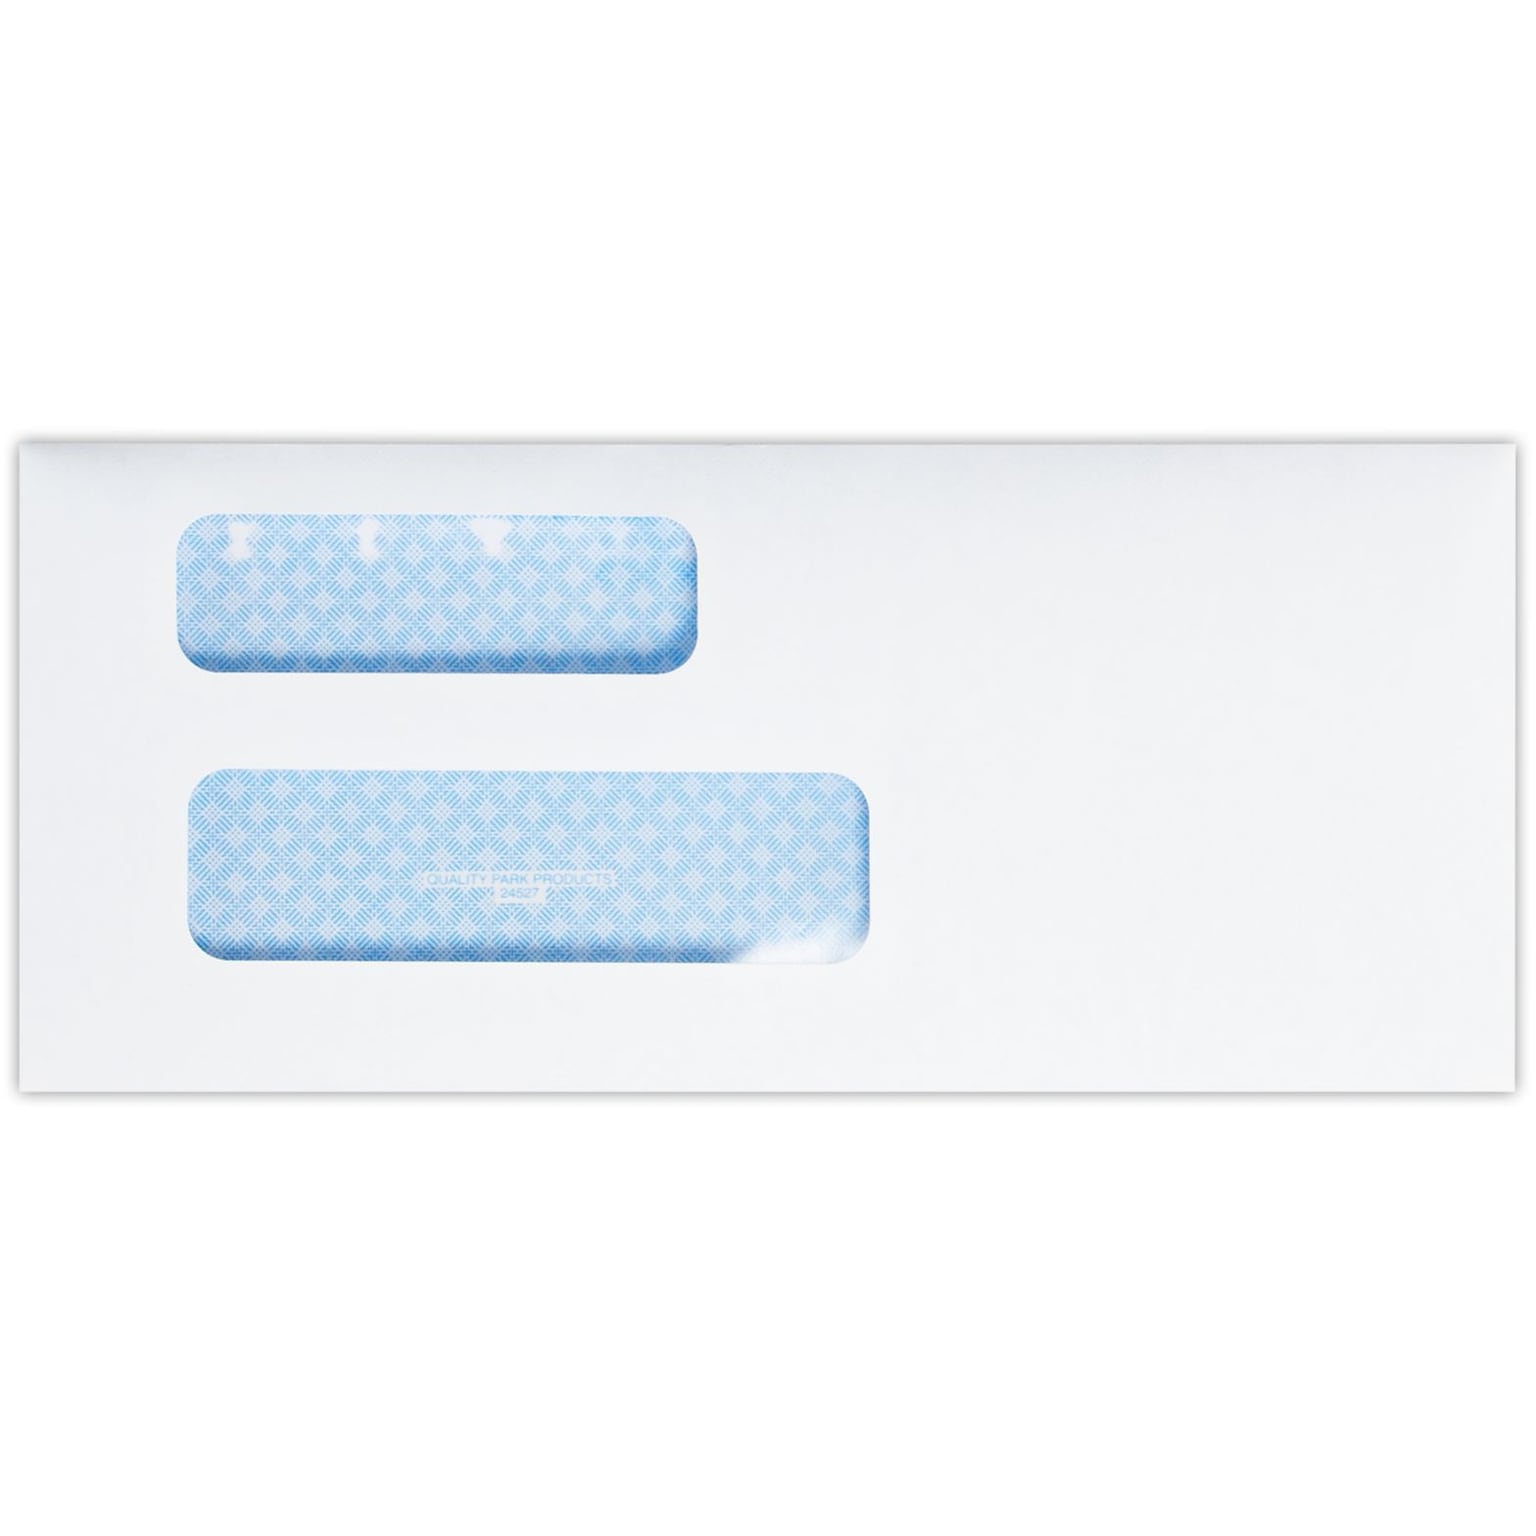 Quality Park Moistenable Glue Security Tinted #9 Double Window Envelope, 3 7/8 x 8 7/8, Bright White, 50/Pack (9DW-W-50)